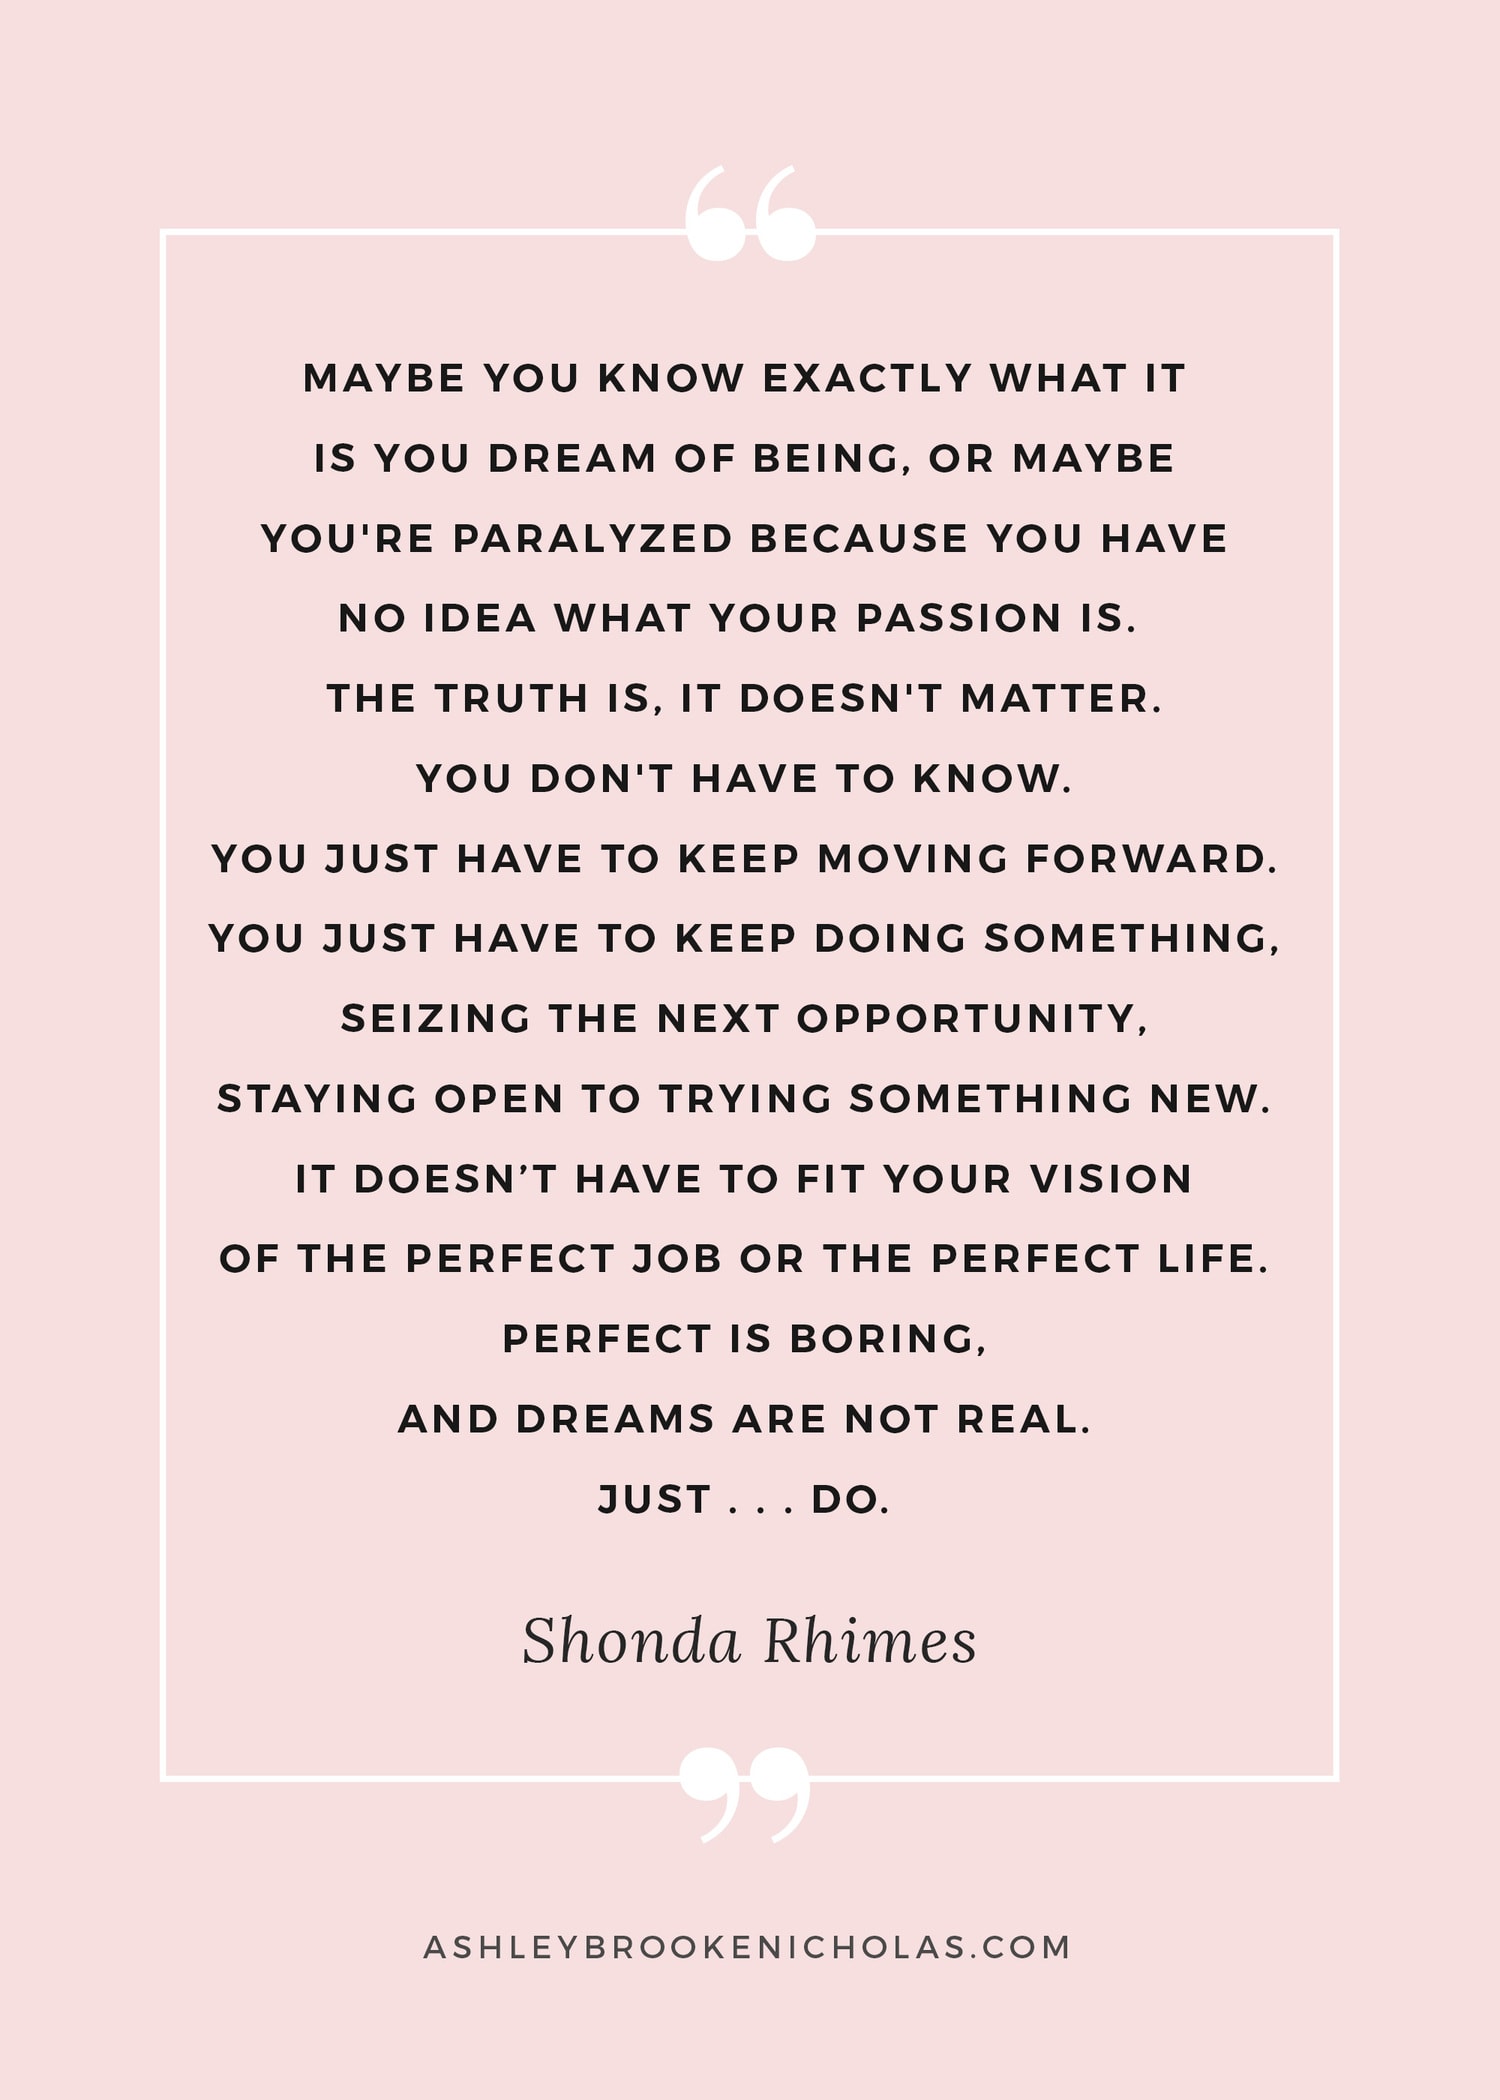 The best Shonda Rhimes quotes | “Maybe you know exactly what it is you dream of being, or maybe you're paralyzed because you have no idea what your passion is. The truth is, it doesn't matter. You don't have to know. You just have to keep moving forward. You just have to keep doing something, seizing the next opportunity, staying open to trying something new. It doesn’t have to fit your vision of the perfect job or the perfect life. Perfect is boring, and dreams are not real. Just . . . DO.” ― Shonda Rhimes, Year of Yes: How to Dance It Out, Stand In the Sun and Be Your Own Person